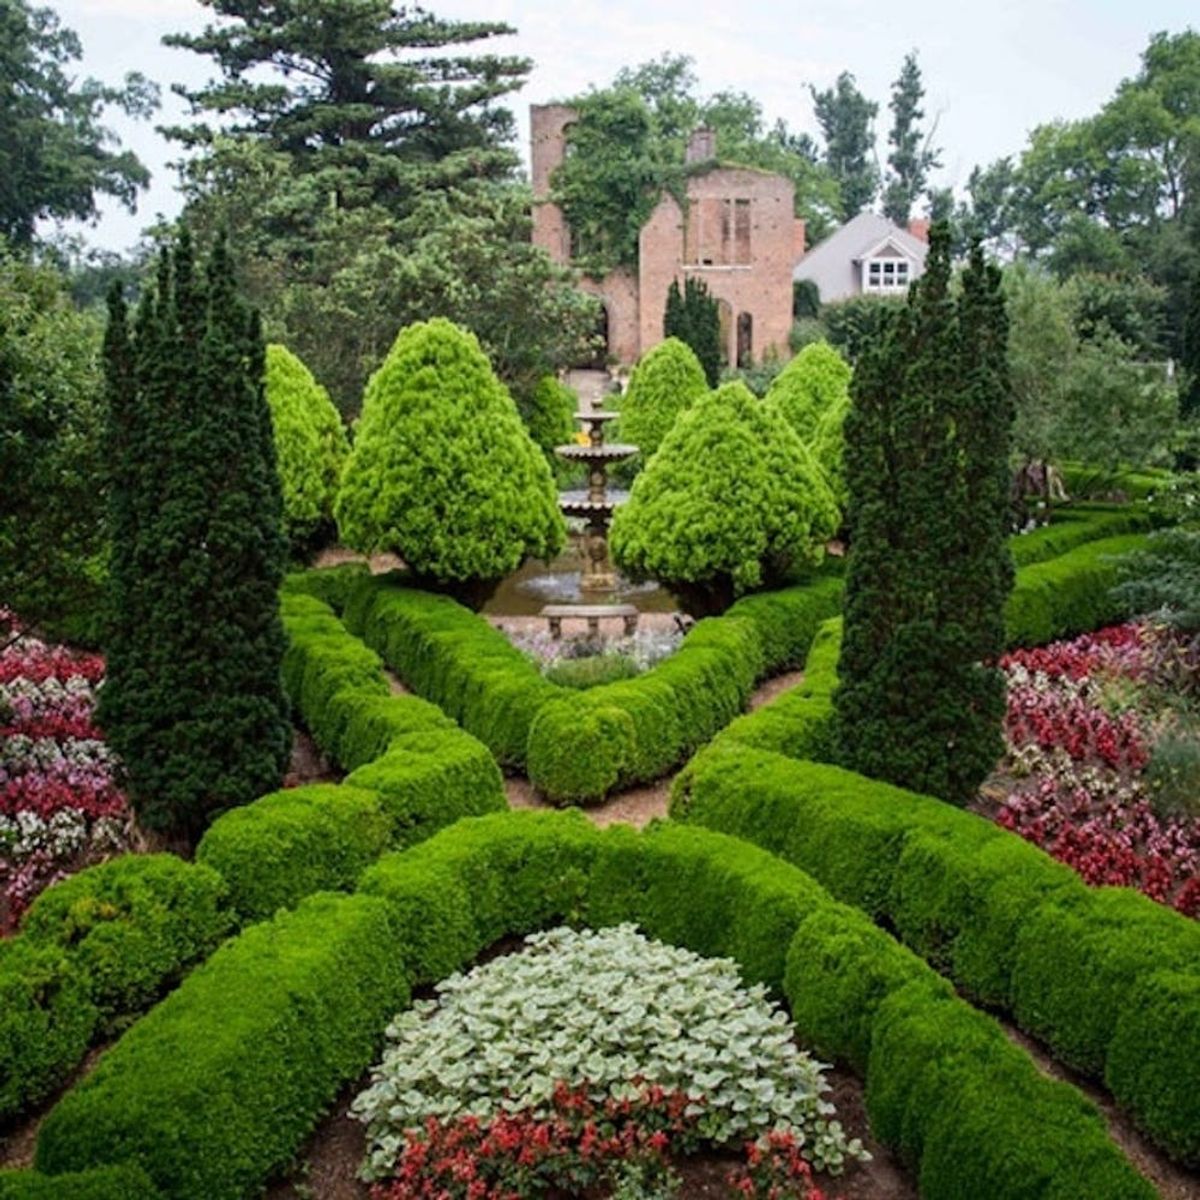 The Dreamiest Hotel Gardens for Your Next Romantic Getaway